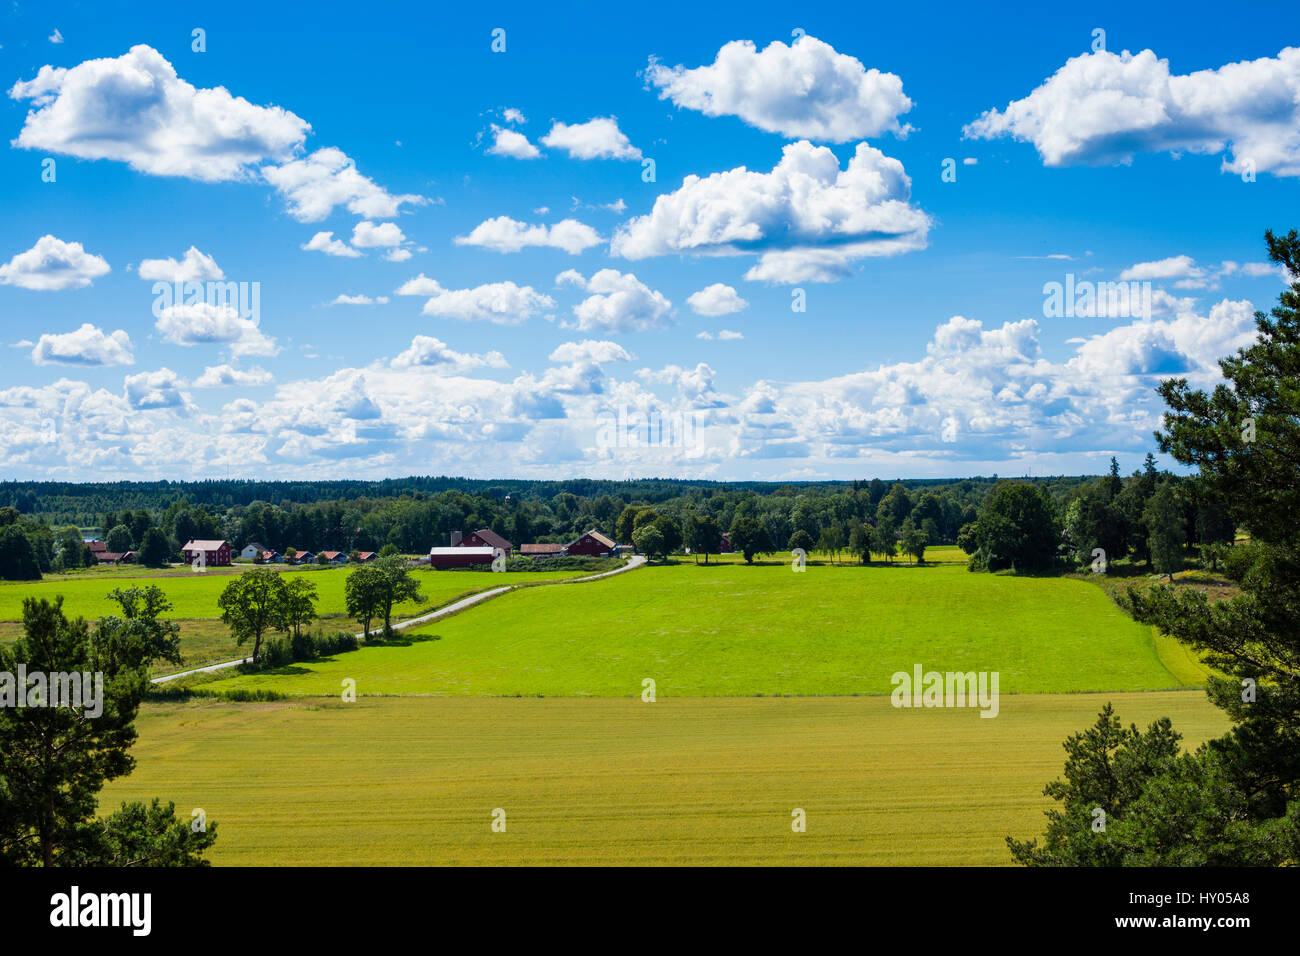 Sweden Scandinavia. Beautiful nature and landscape photo. Warm summer day with white clouds in sky. Lovely view from mountain over field. Nice image Stock Photo